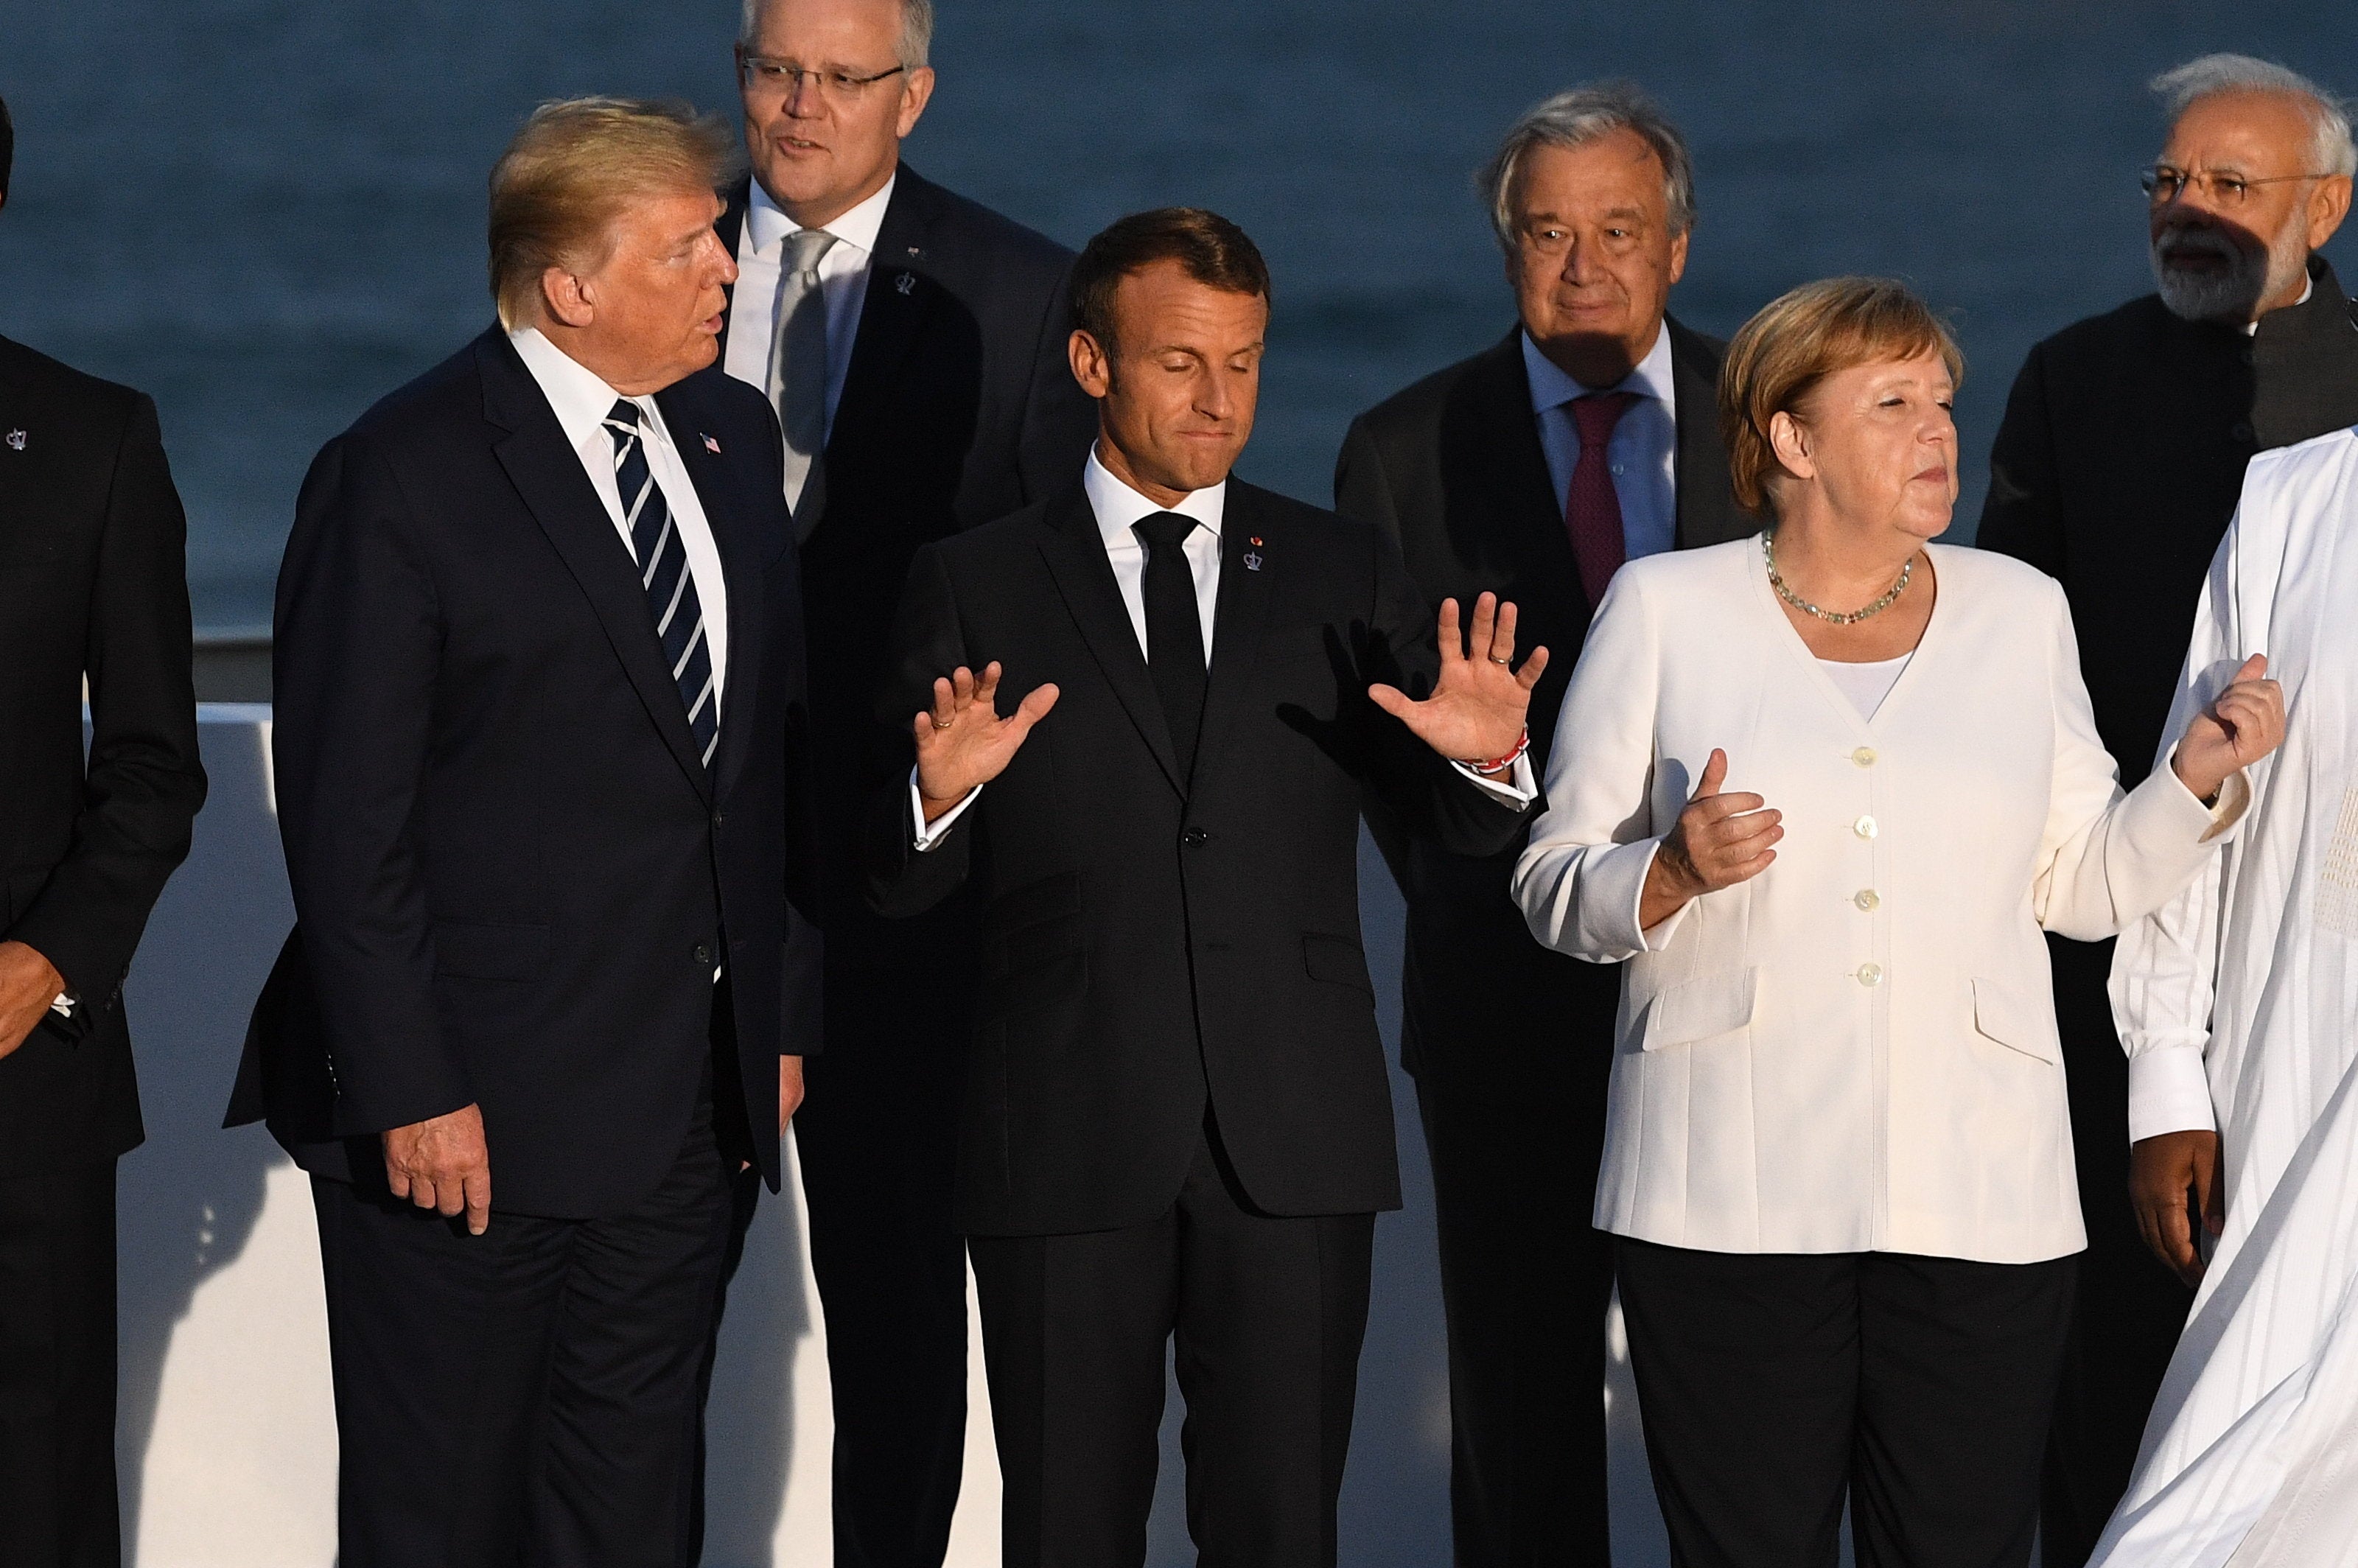 Heads of government attending the G7 Summit in Biarritz, France, in August 2019